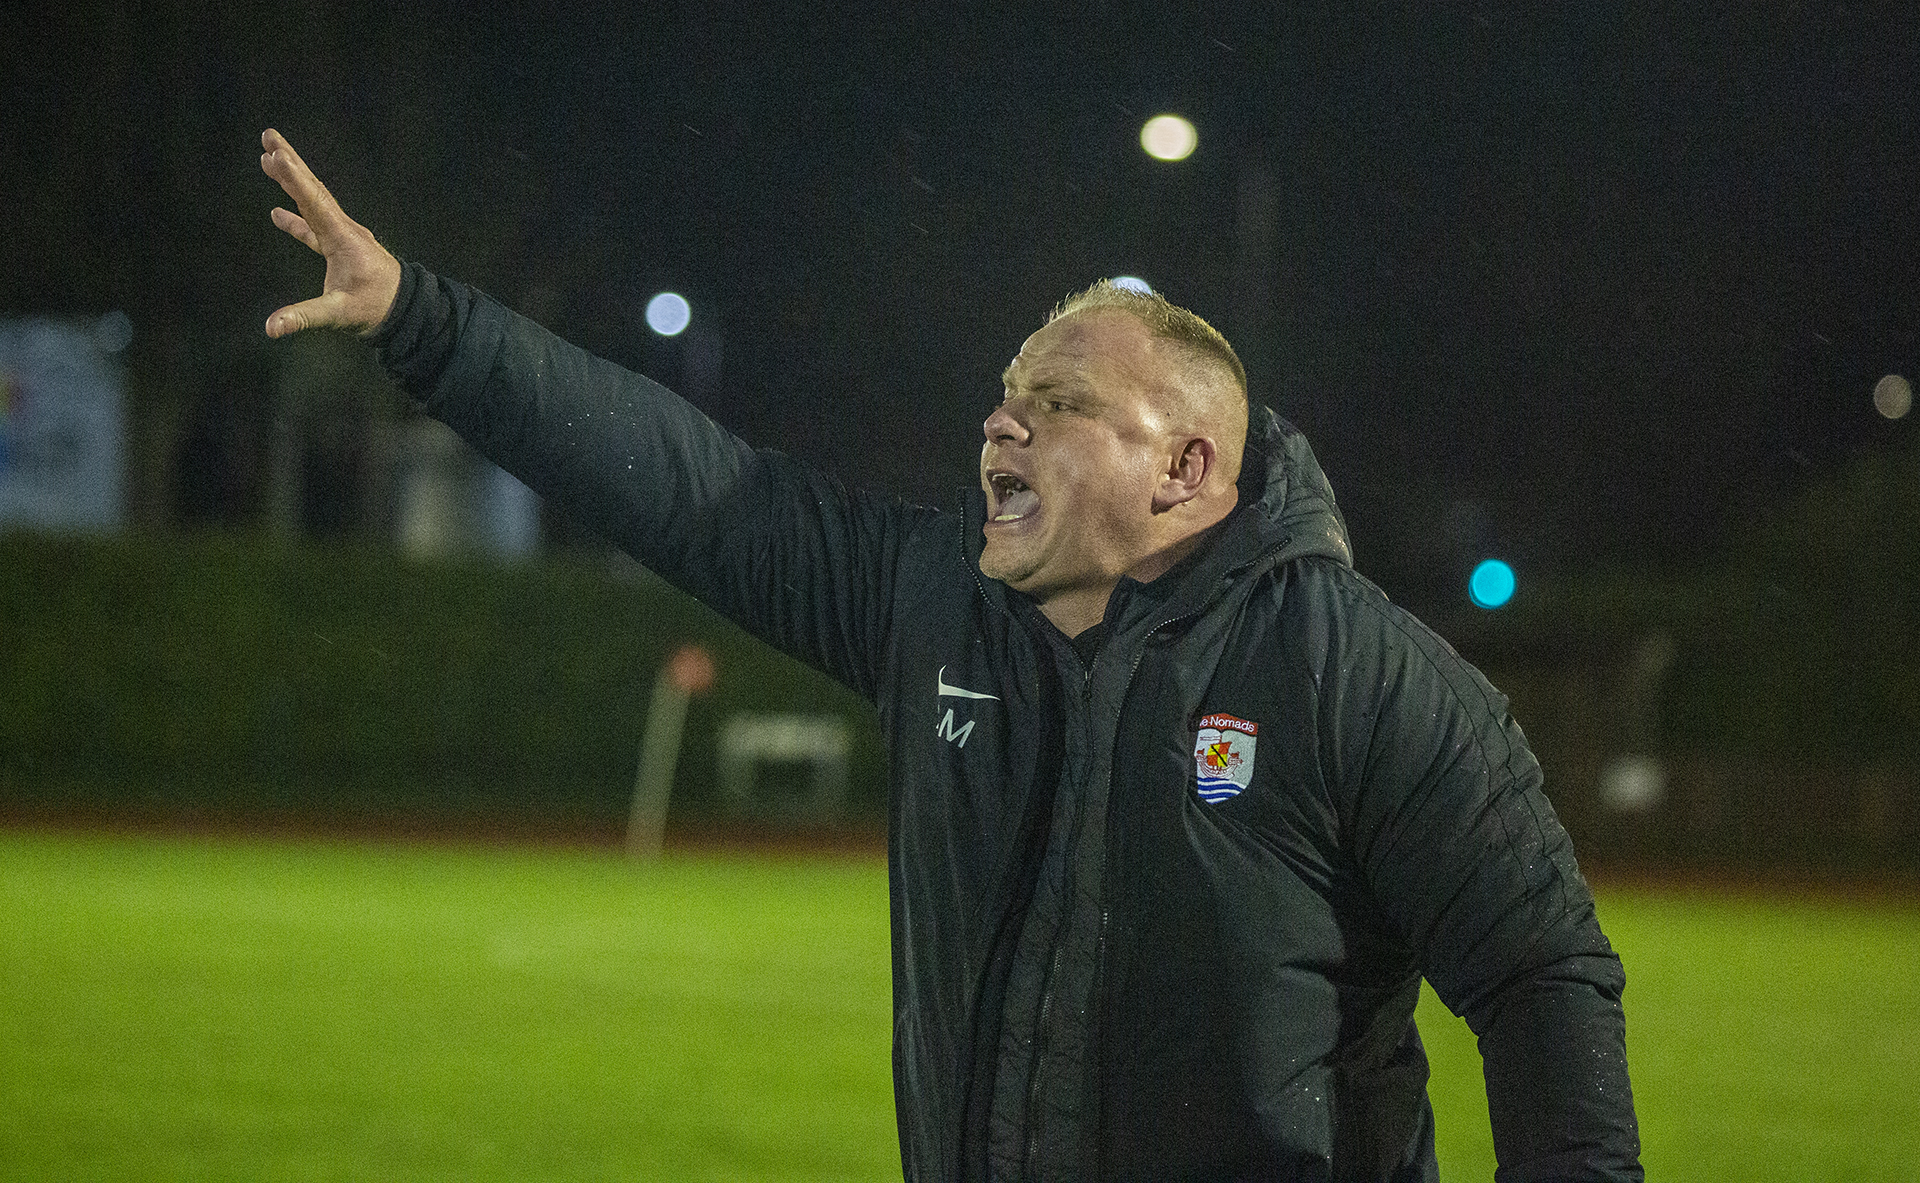 Andy Morrison during The Nomads' 1-0 victory over TNS | © NCM Media